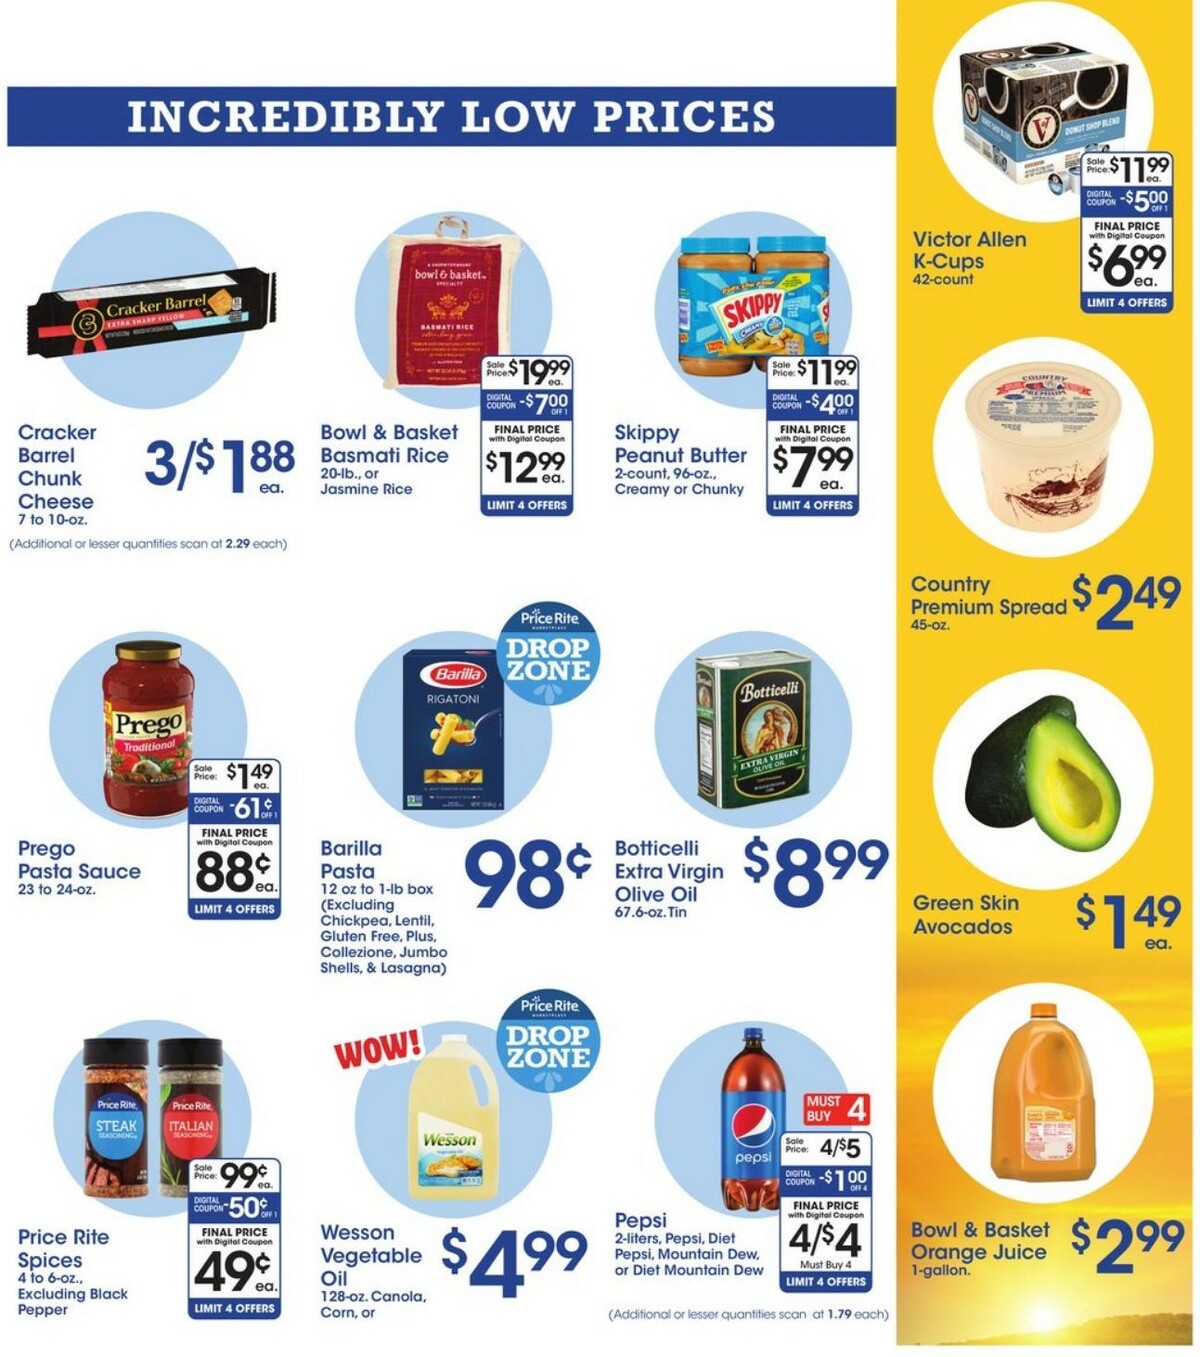 Price Rite Weekly Ad from January 7